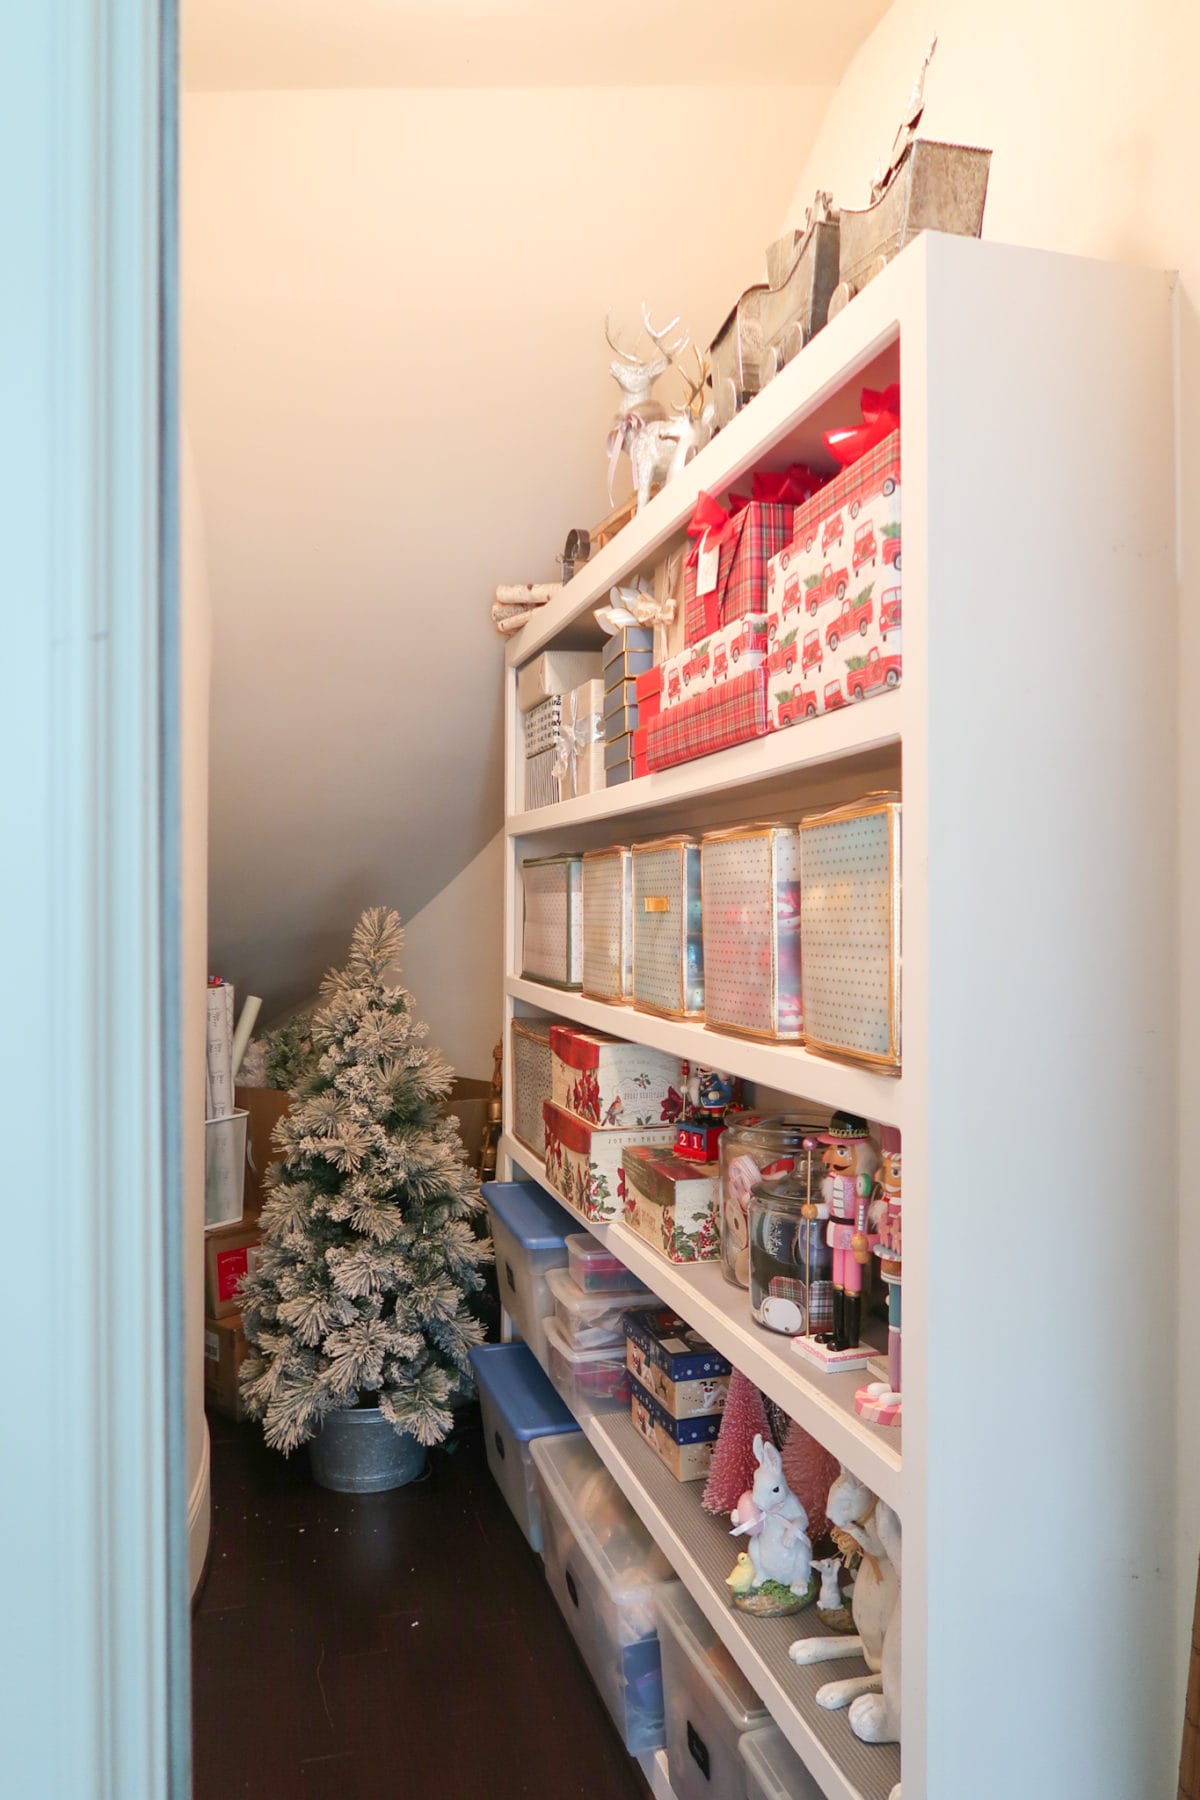 How To Store Christmas Decorations: Holiday Storage Ideas and